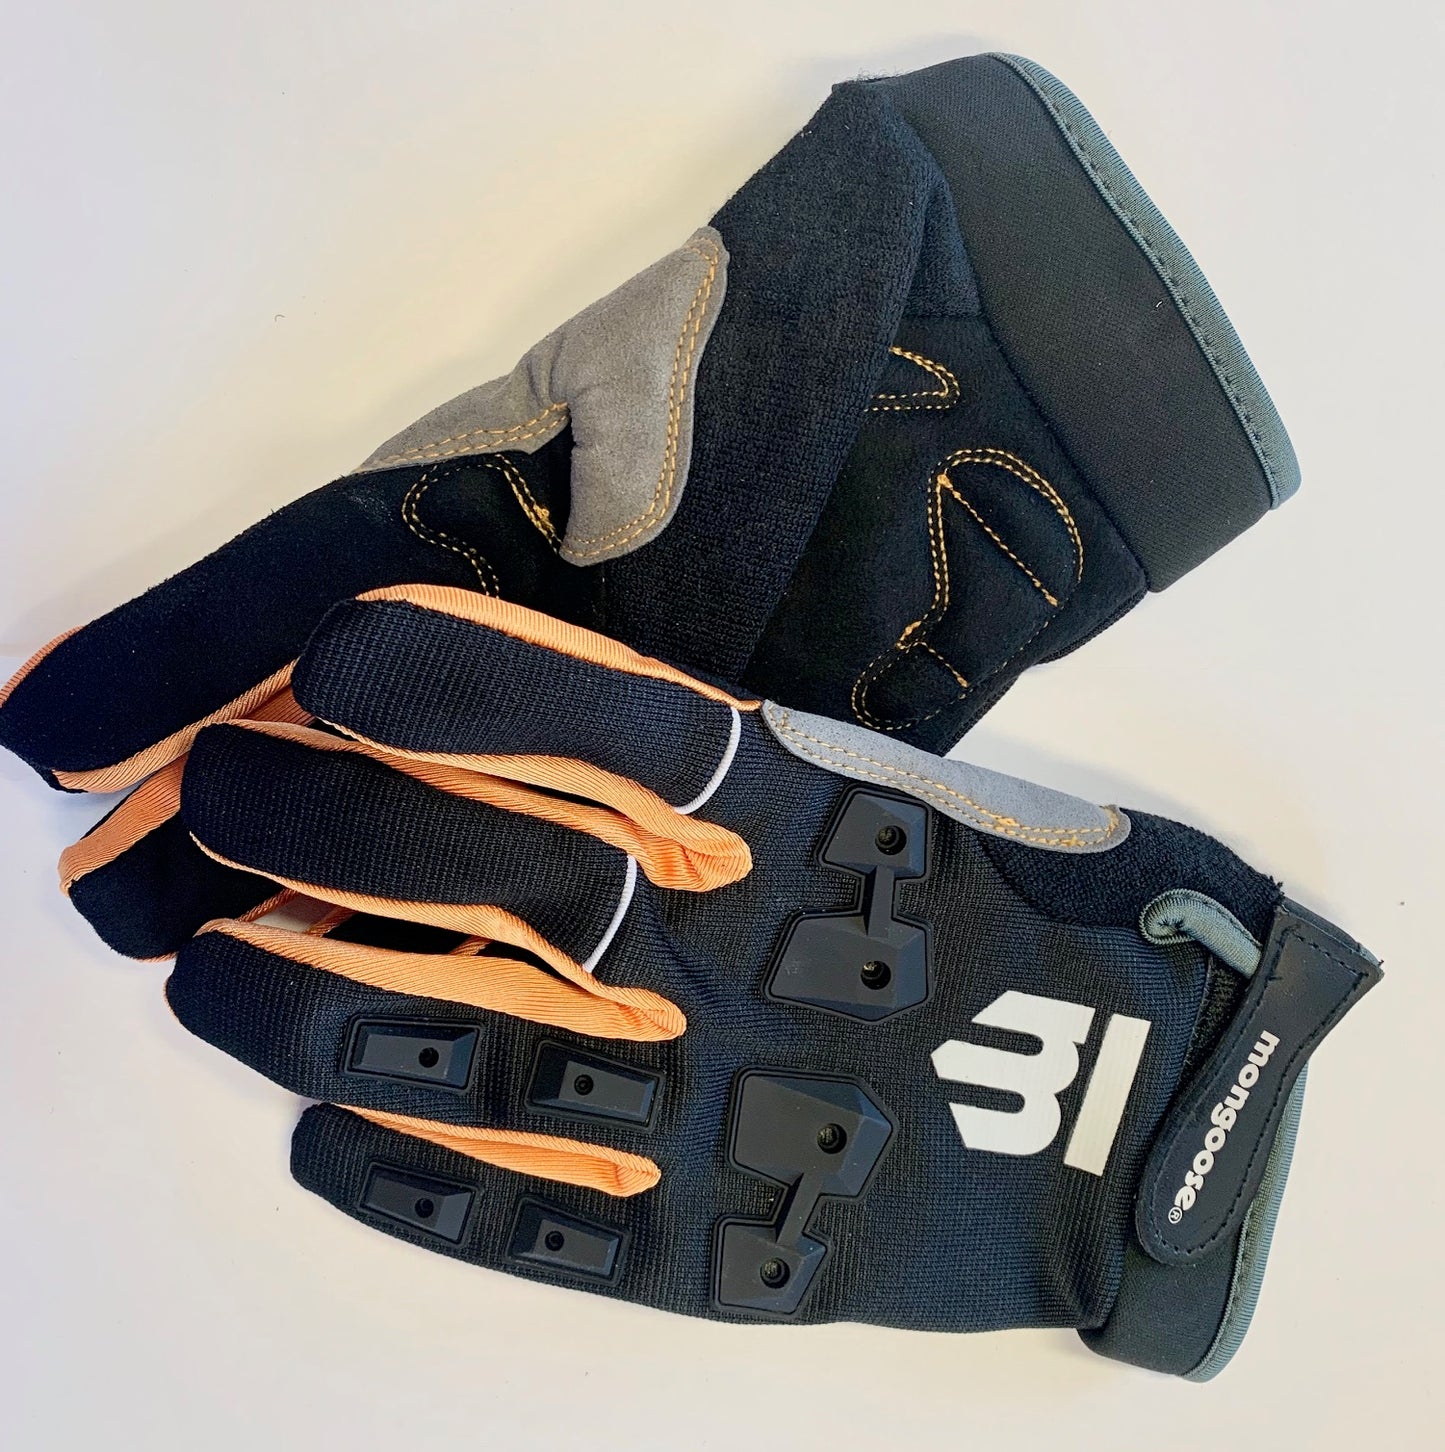 Lot of 2 Mongoose L/XL Full Finger Bike Bicycle Padded Gloves BMX Mountain New